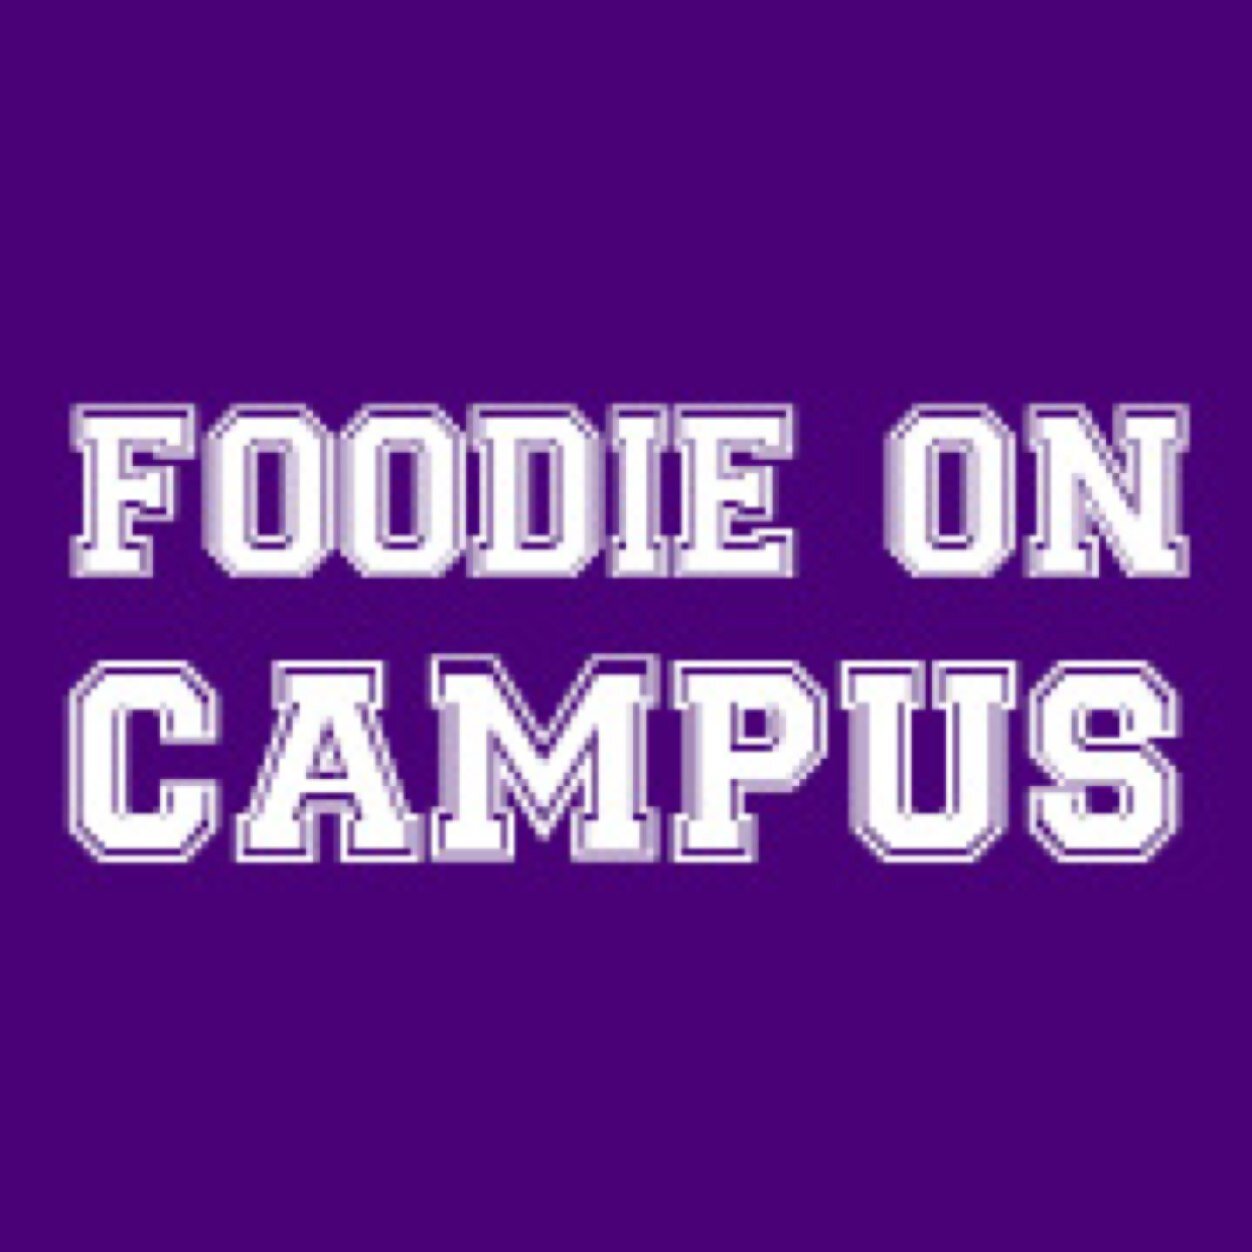 The College Student’s Guide to life as a foodie, served with a scoop of nutrition, fitness and health on the side.